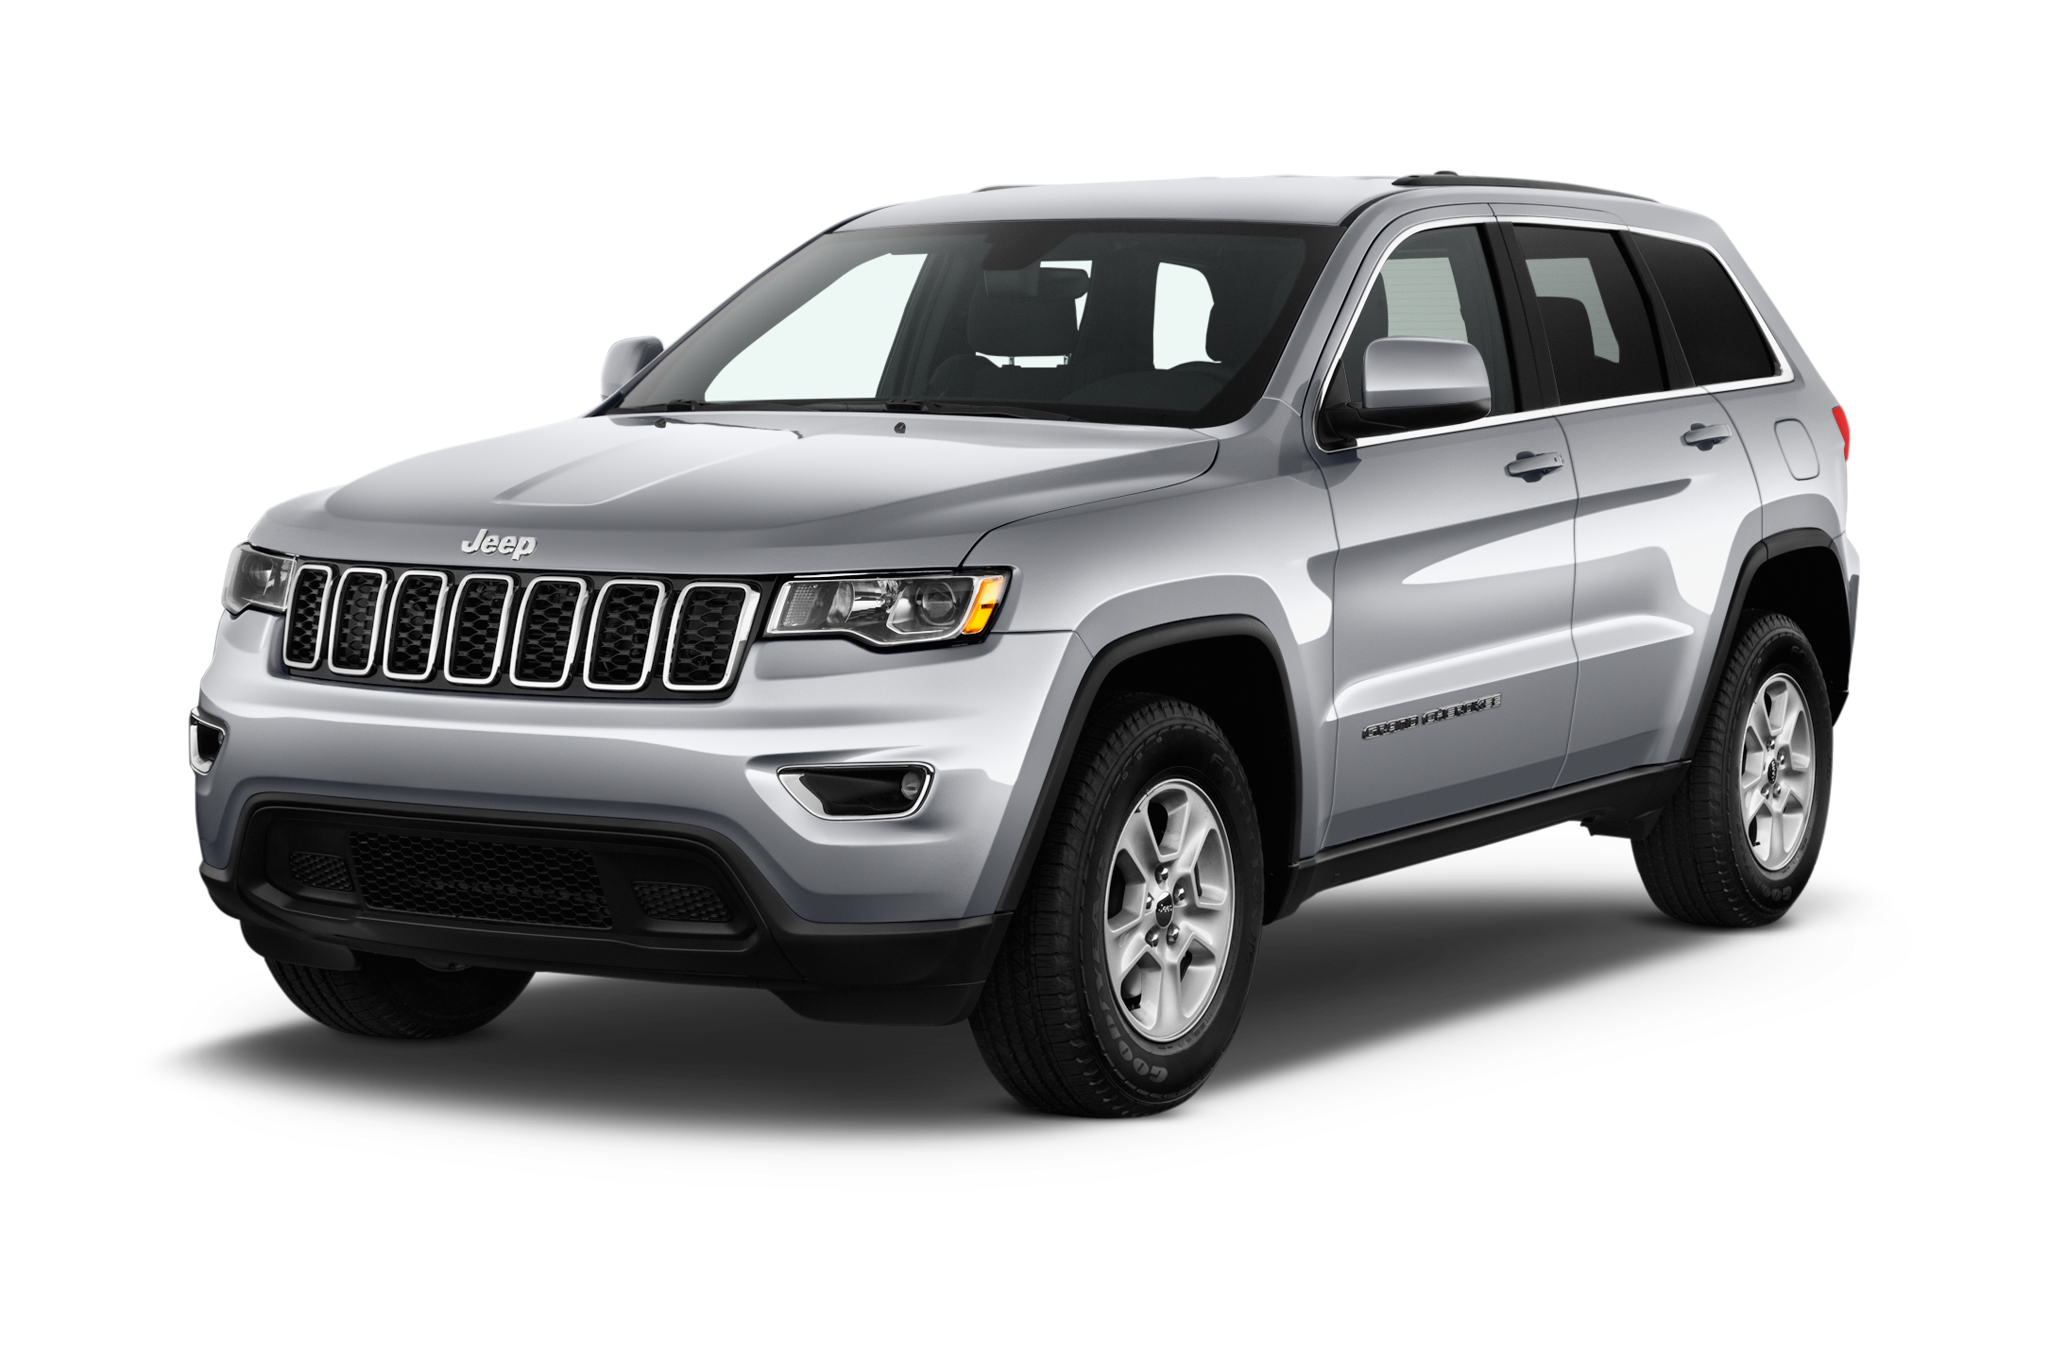 2018 Jeep Grand Cherokee Trailhawk 4WD Overview MSN Autos